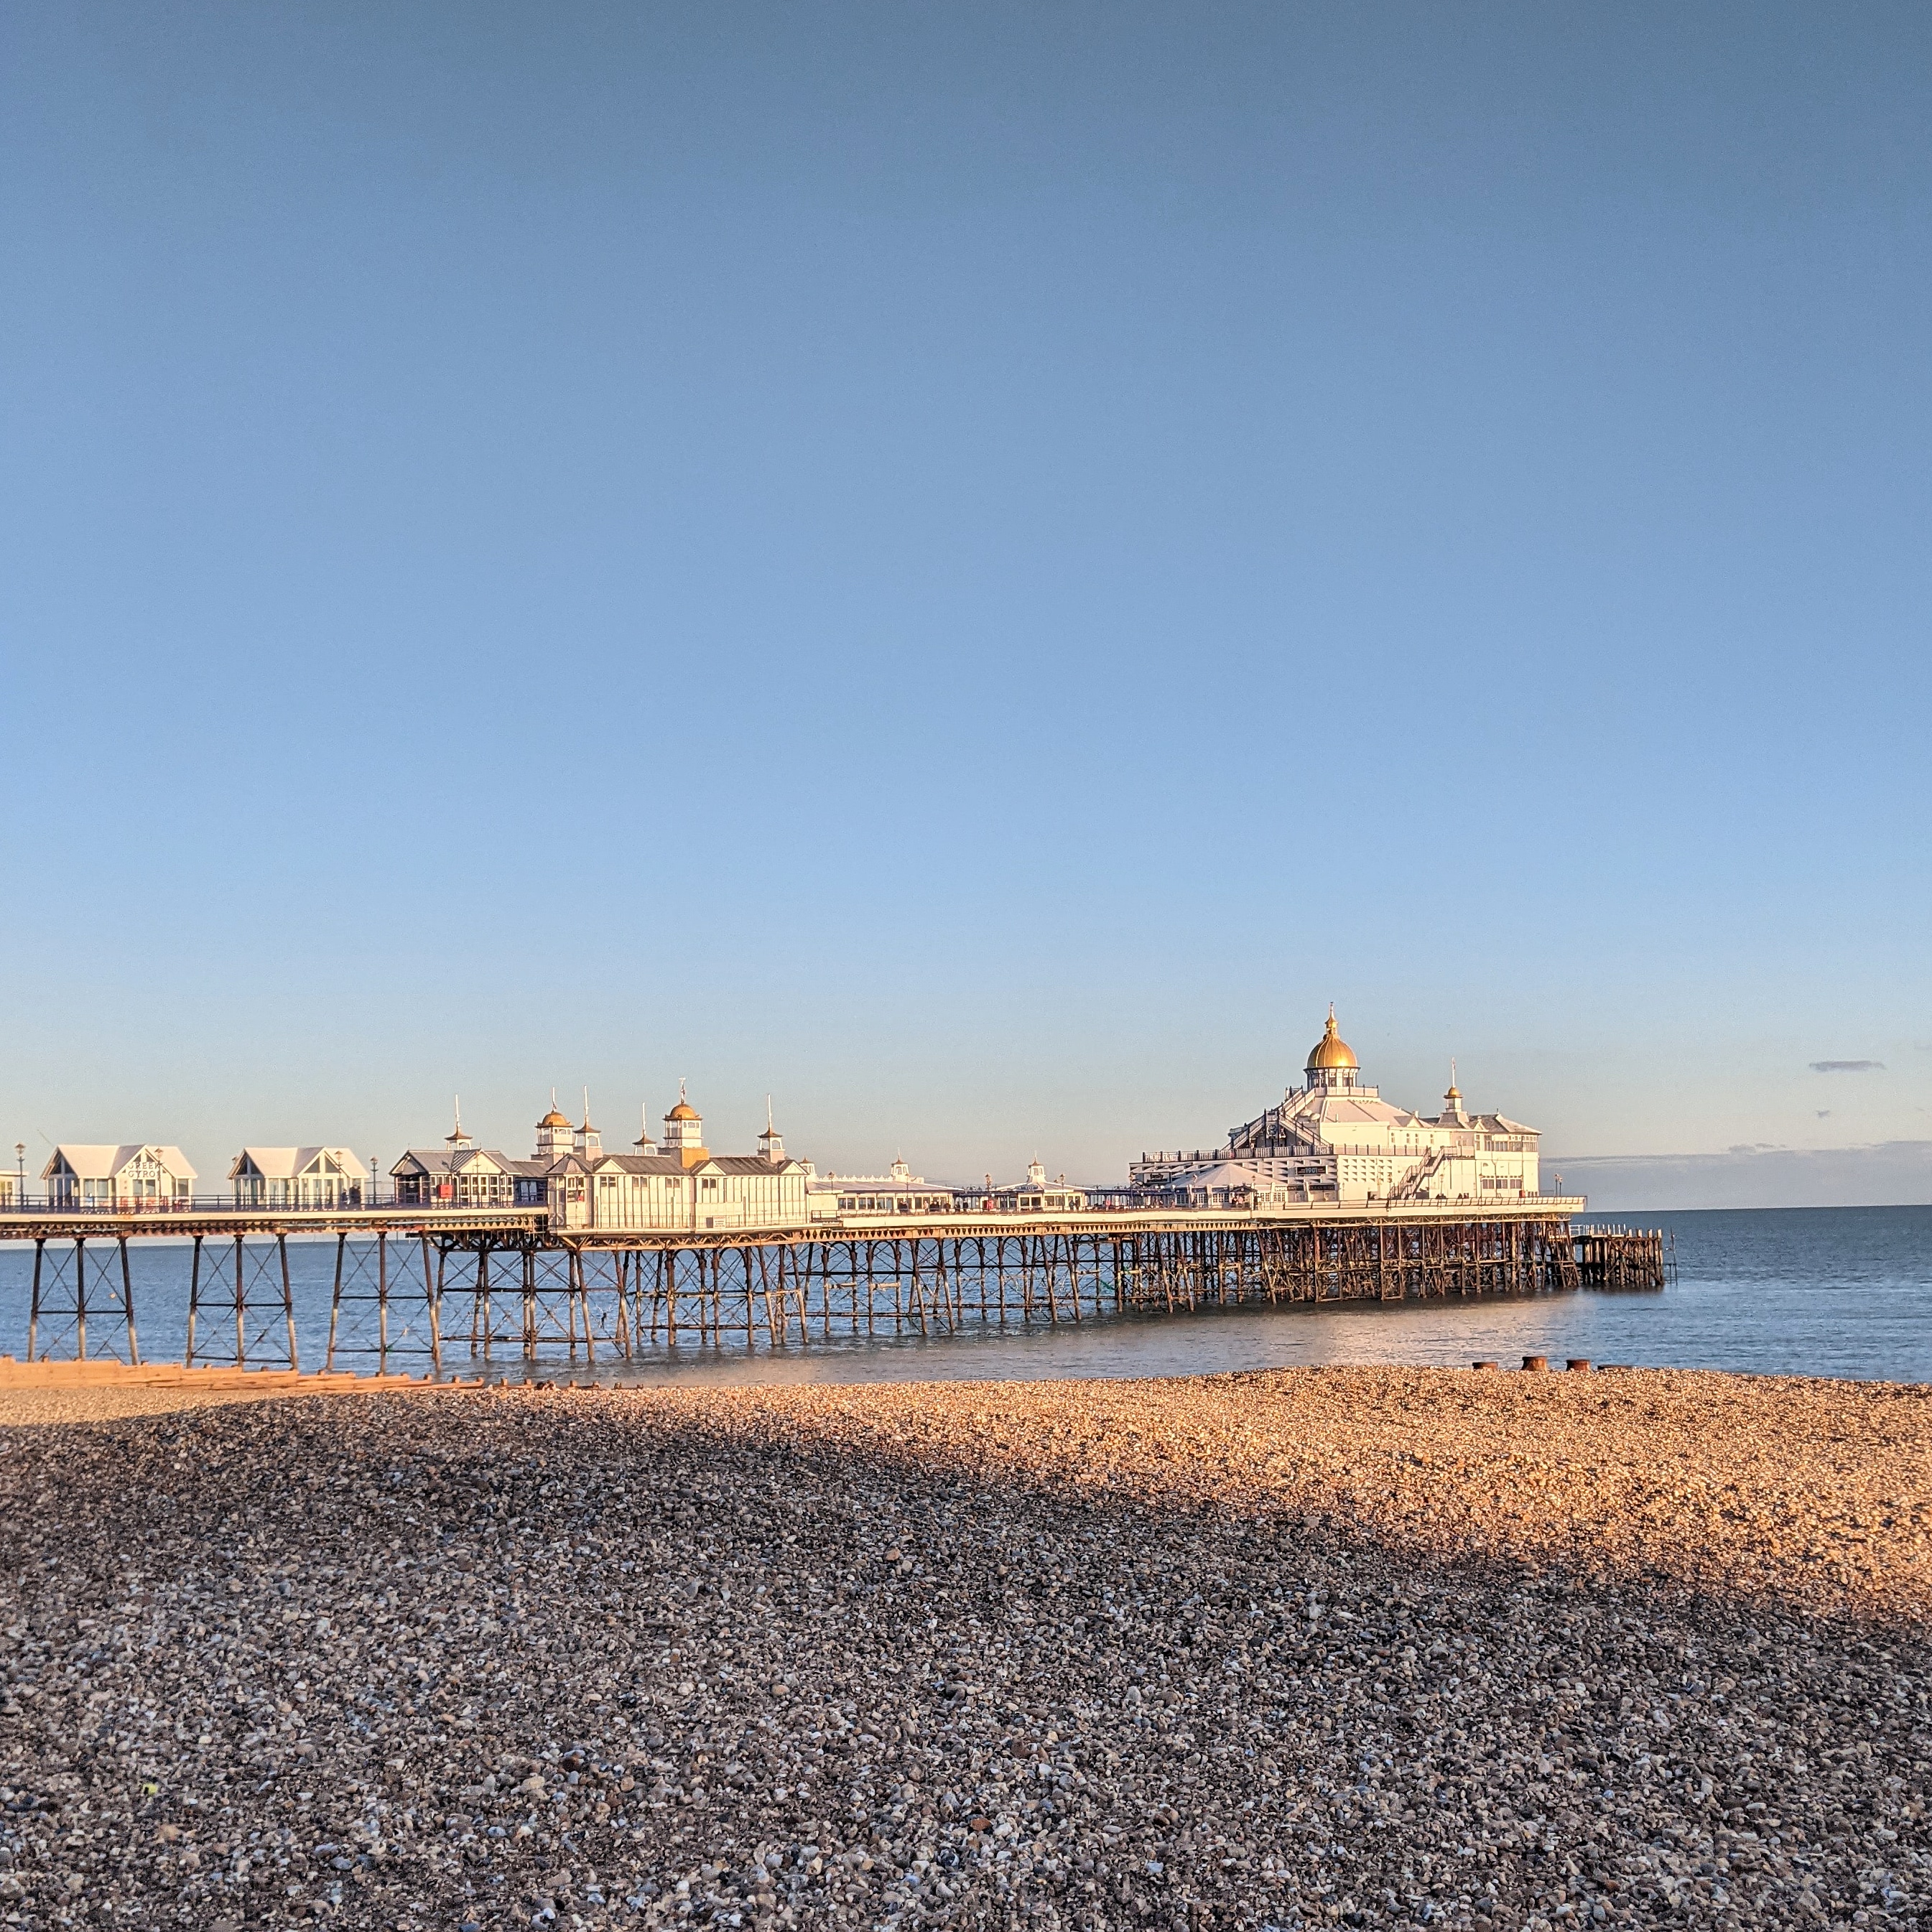 the pier at eastbourne dappled in afternoon sunlight